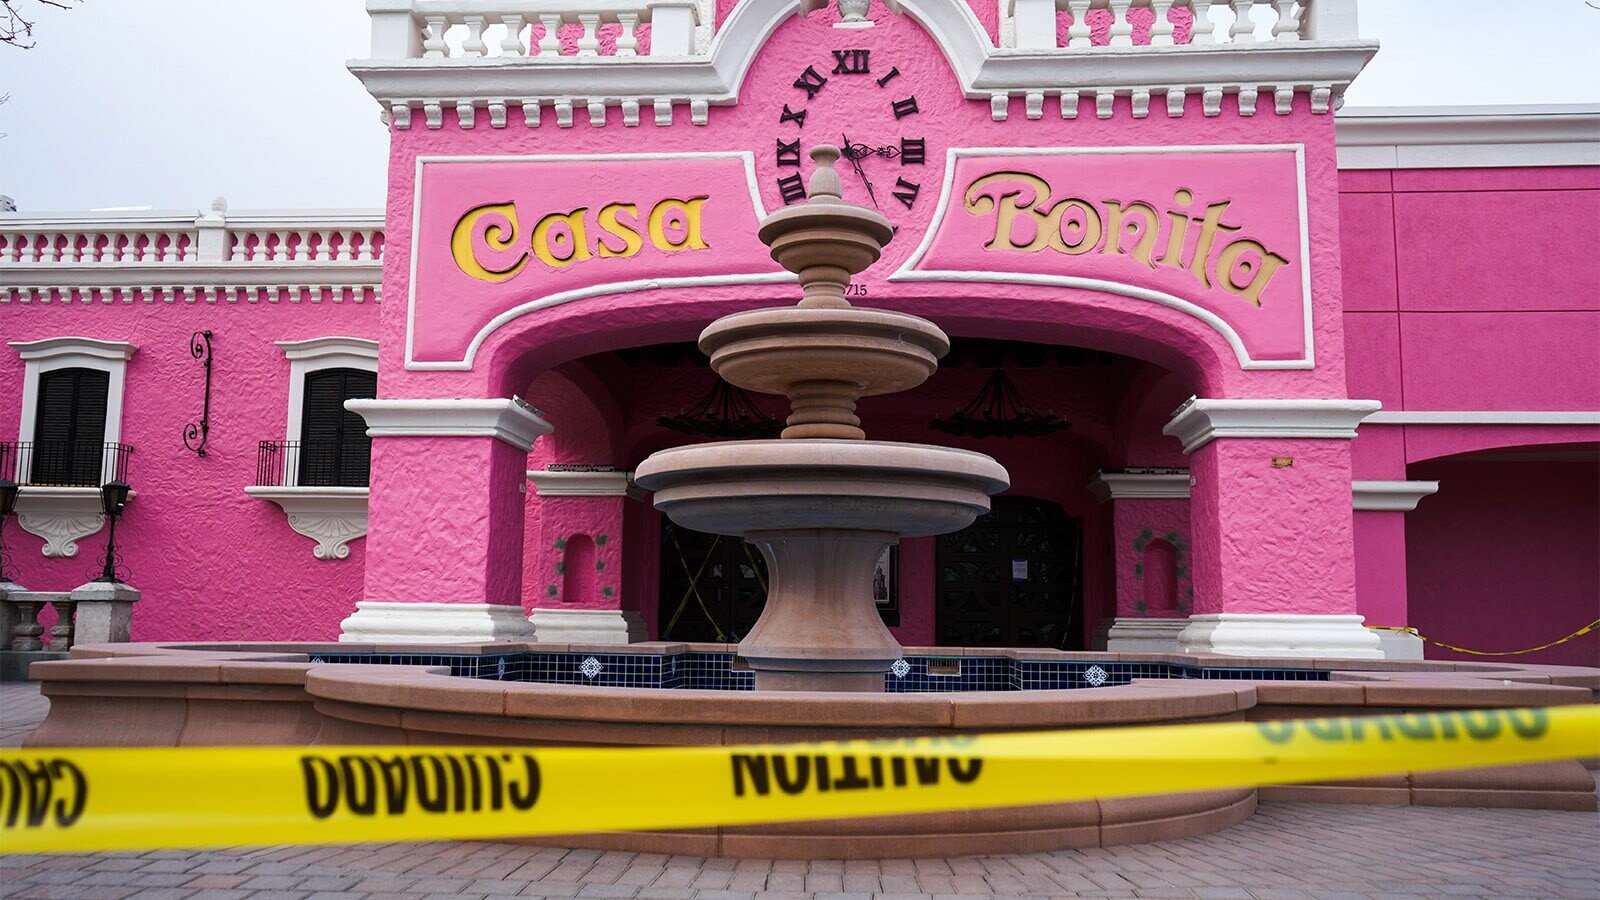 There Were Four Other Casa Bonitas That Trey Parker and Matt Stone Couldn’t Save